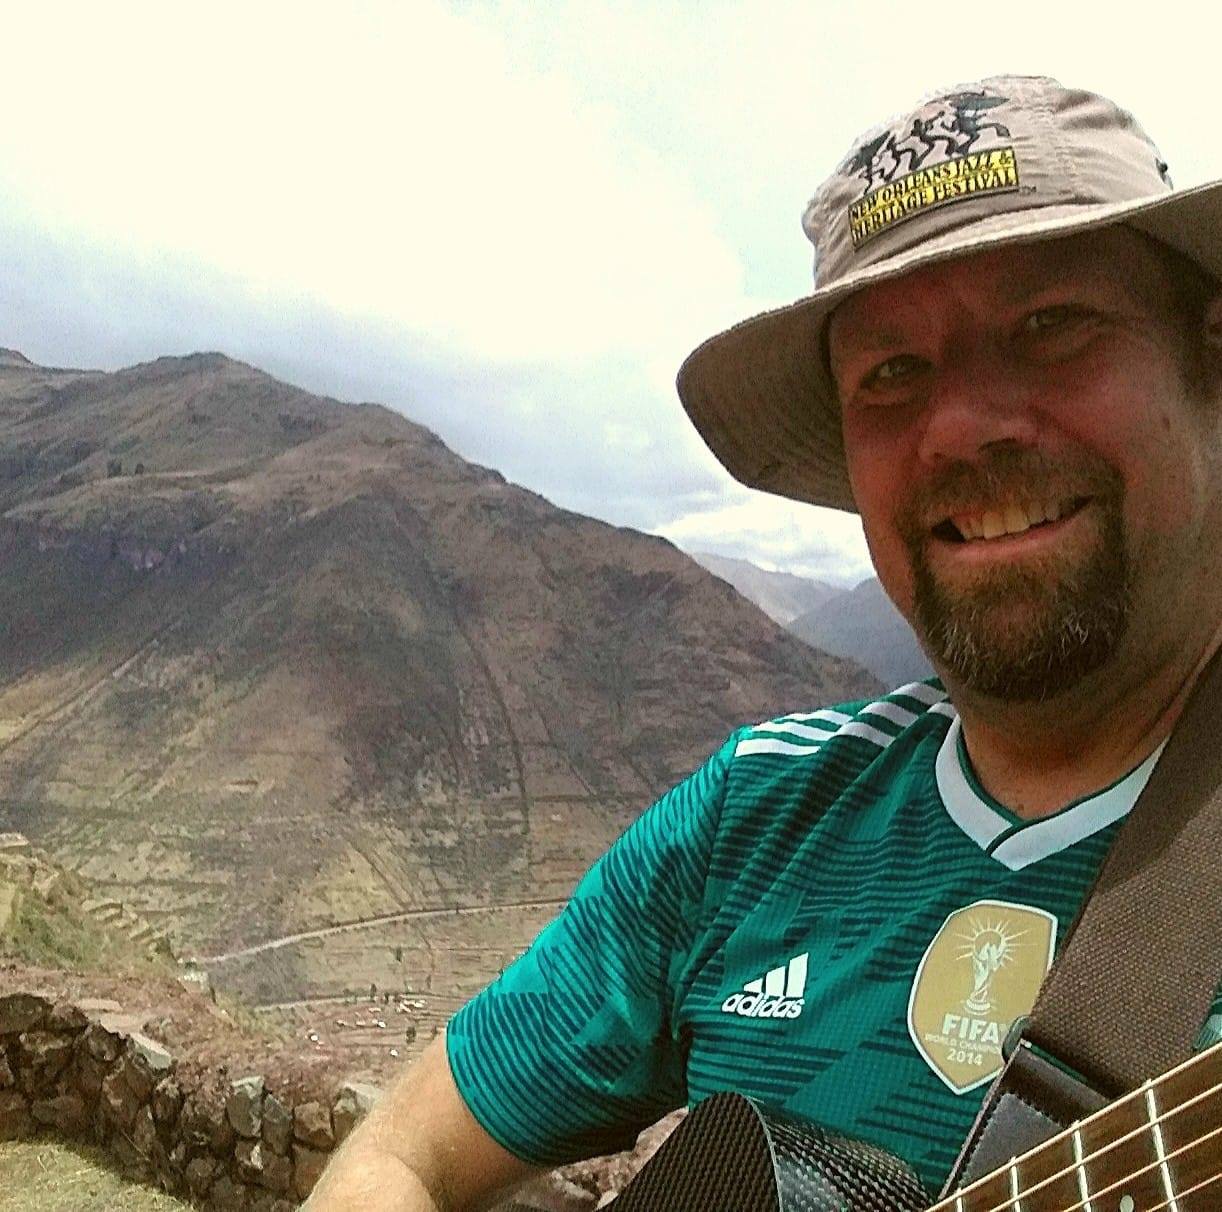 From the Andes to the Amazon with KLOS